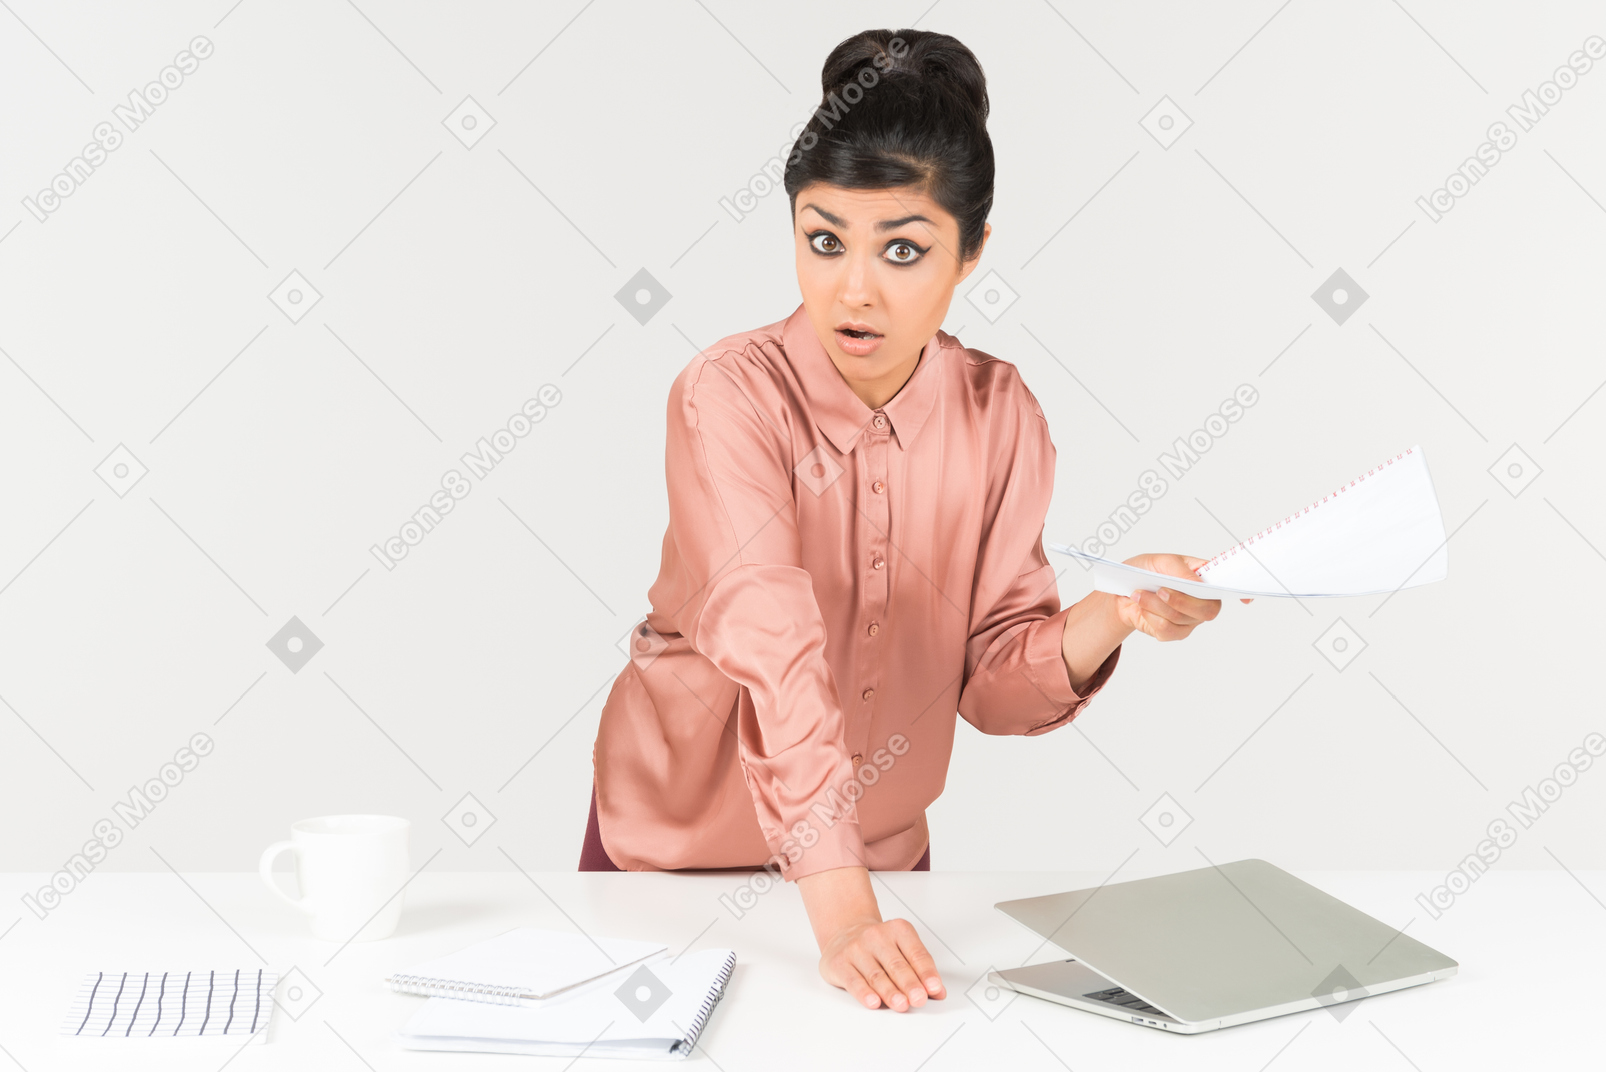 Stunned young indian office worker standing at the office desk and holding papers